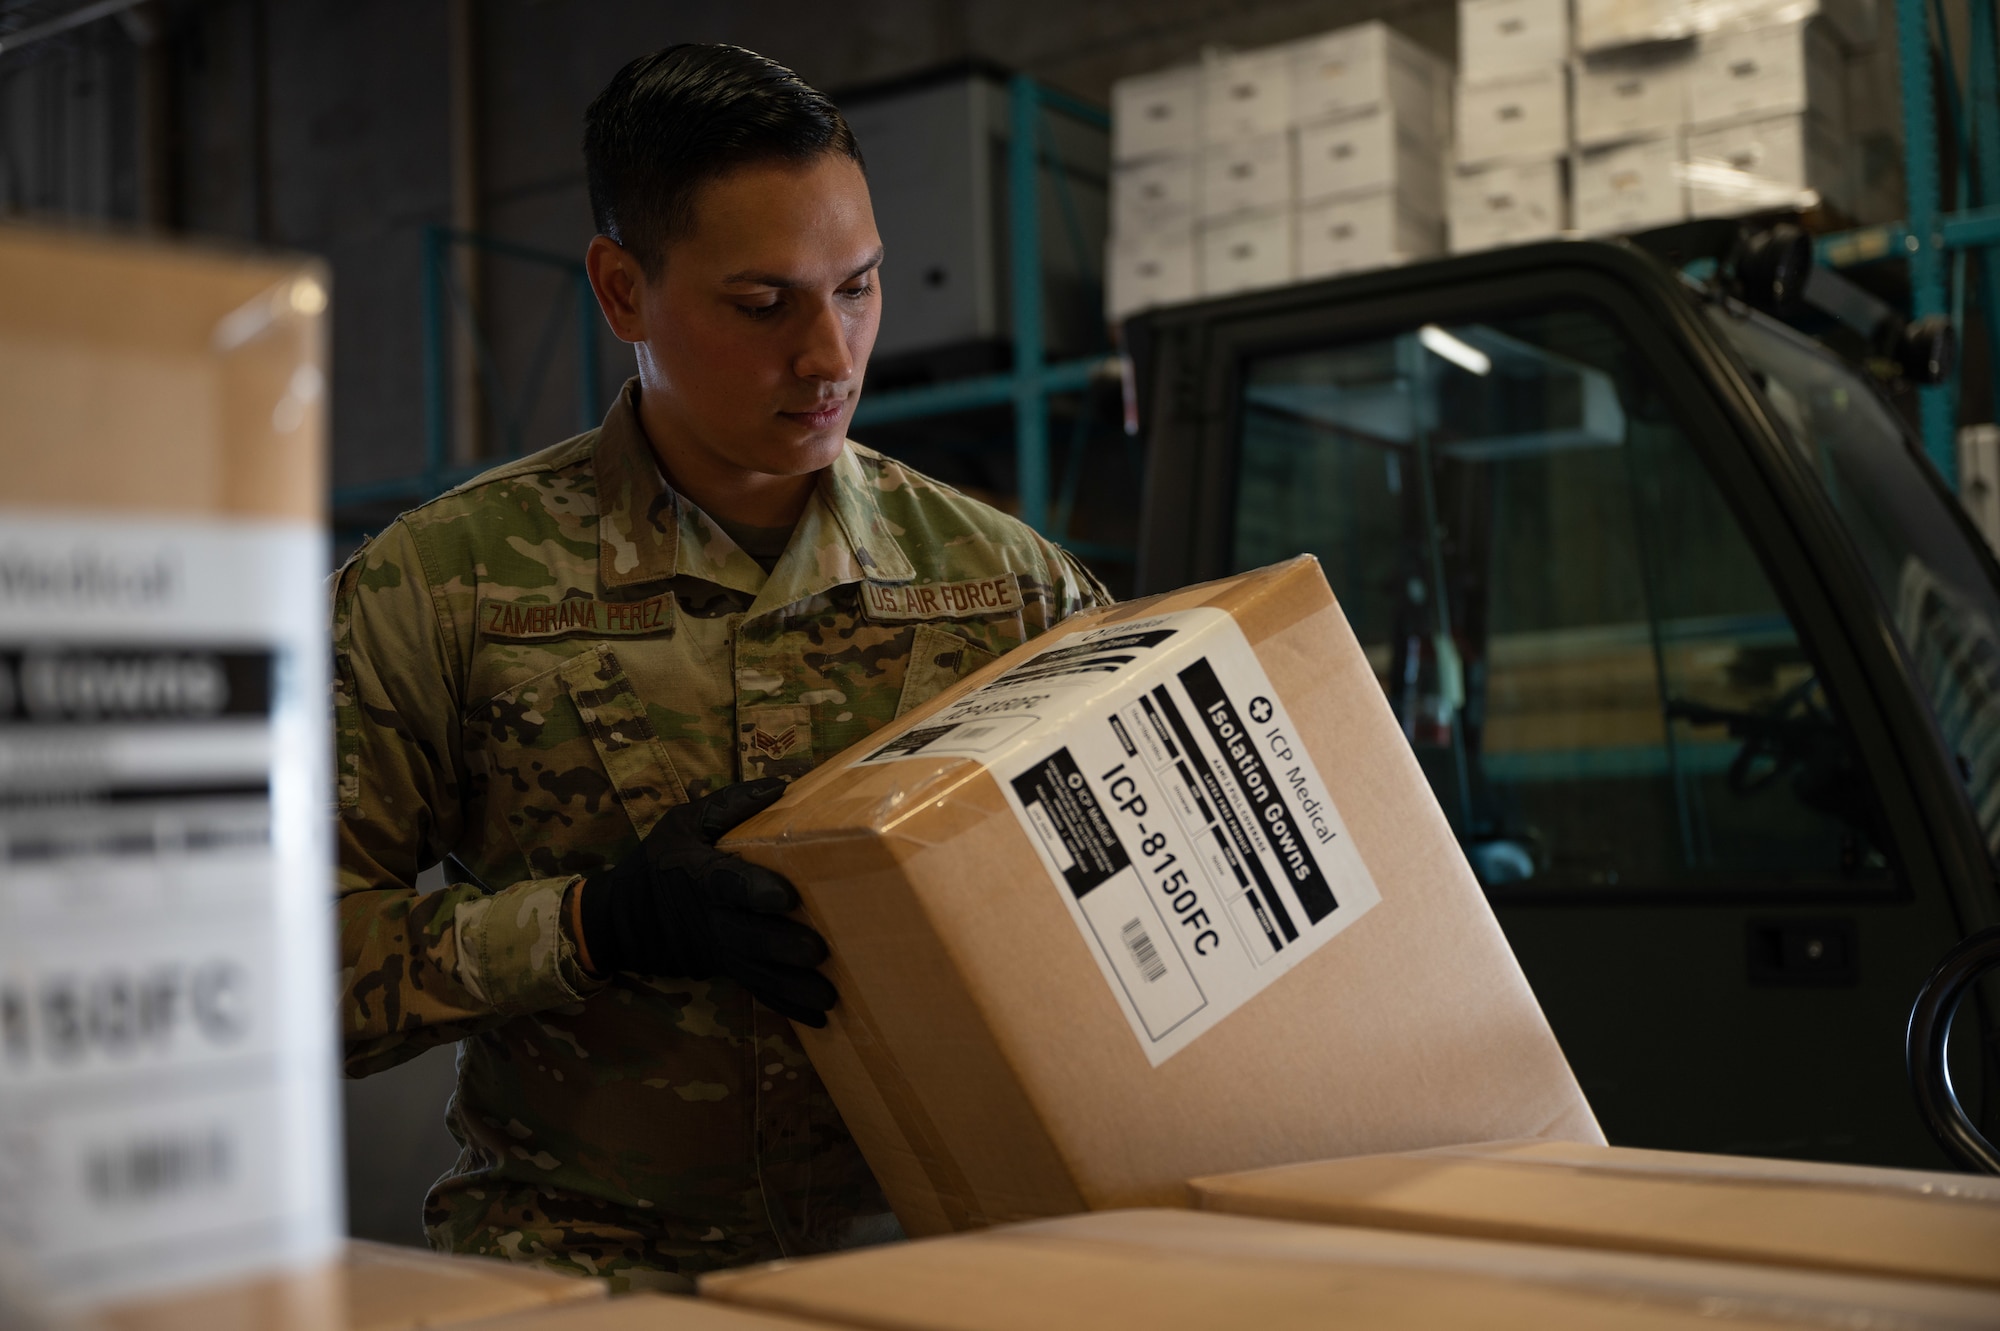 An Airman inspects a package